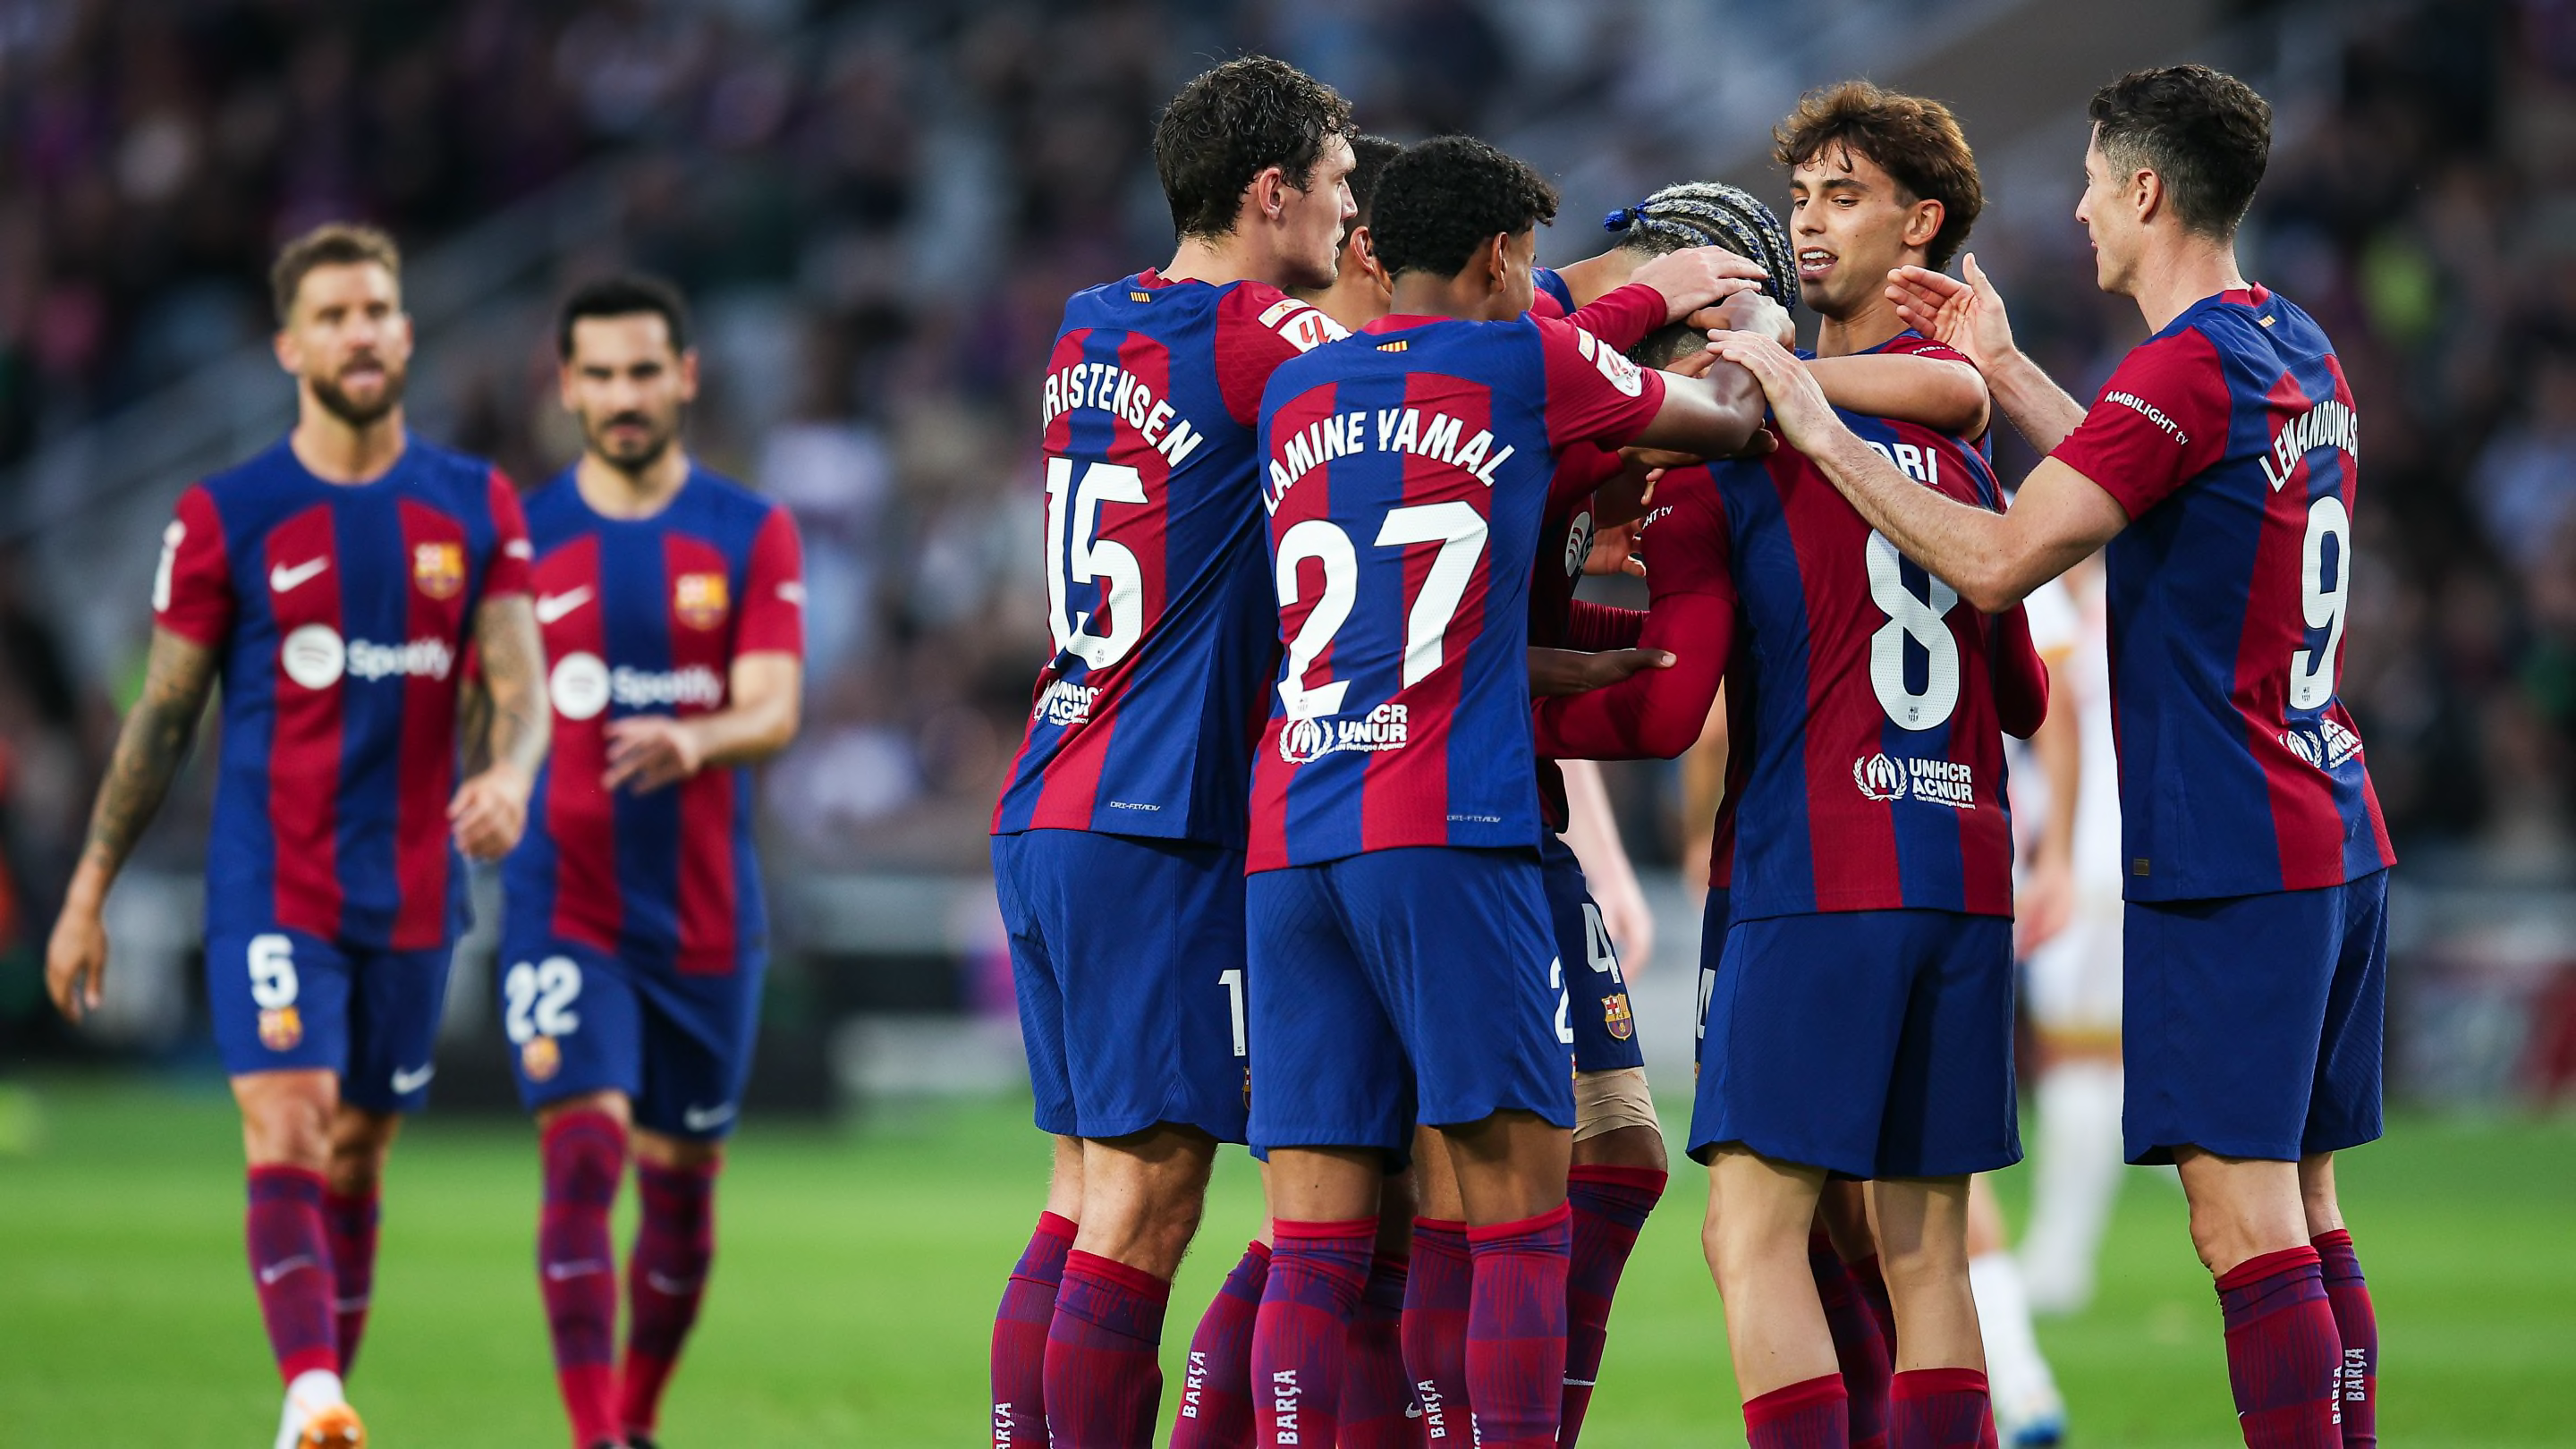 La Liga president explains how Barcelona can sign players this summer